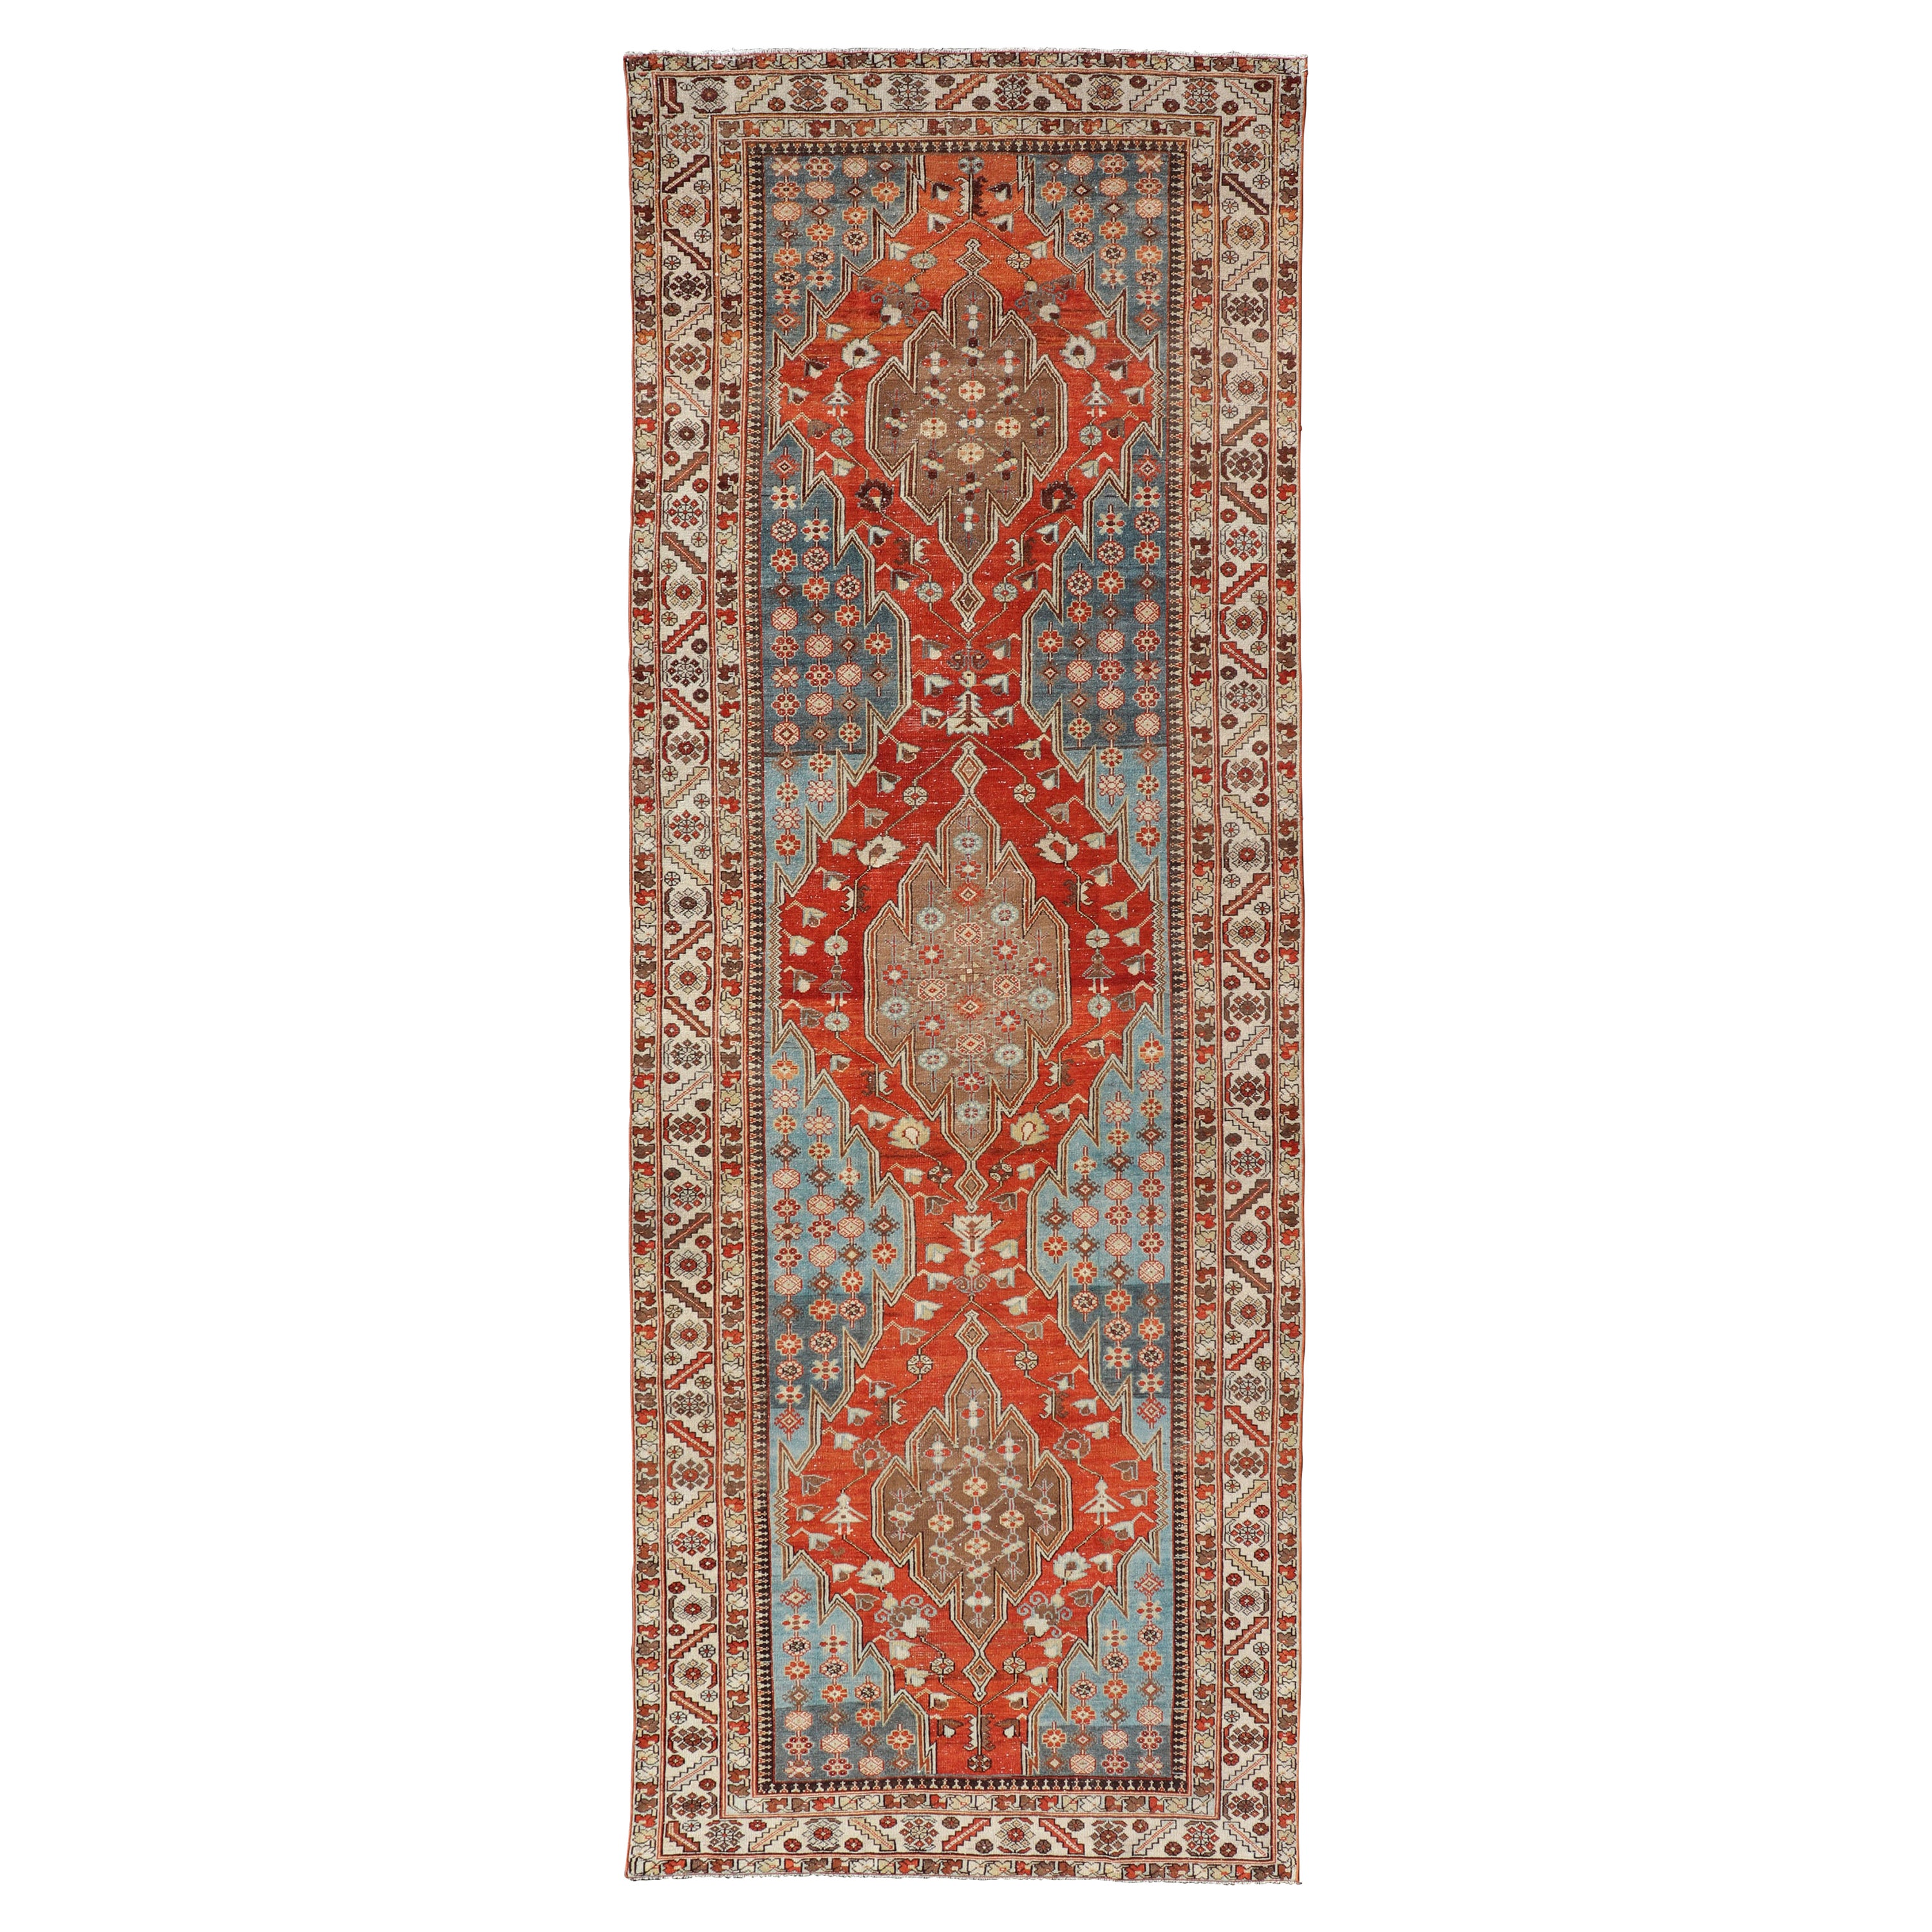 Antique Hamadan Gallery Rug with Geometric Medallions in Red, Blue and Brown